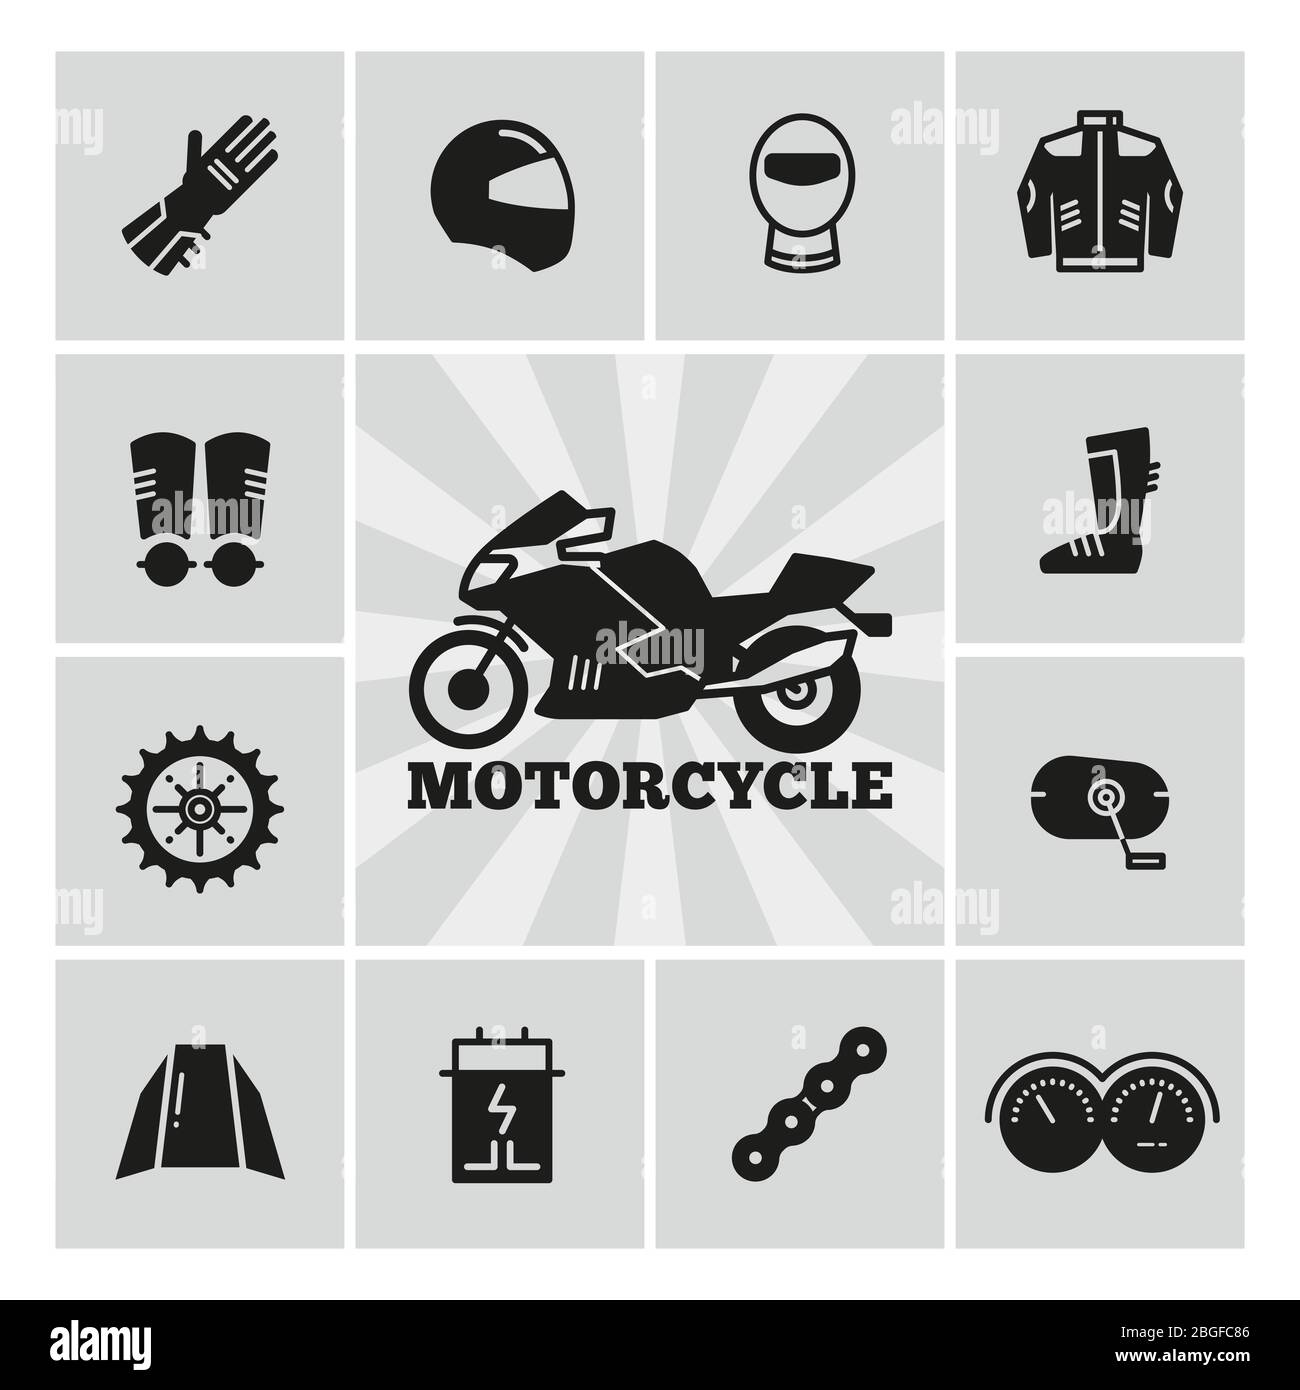 https://c8.alamy.com/comp/2BGFC86/moto-parts-motorcycle-accessories-silhouette-icons-set-gear-for-motorbike-vector-illustration-2BGFC86.jpg